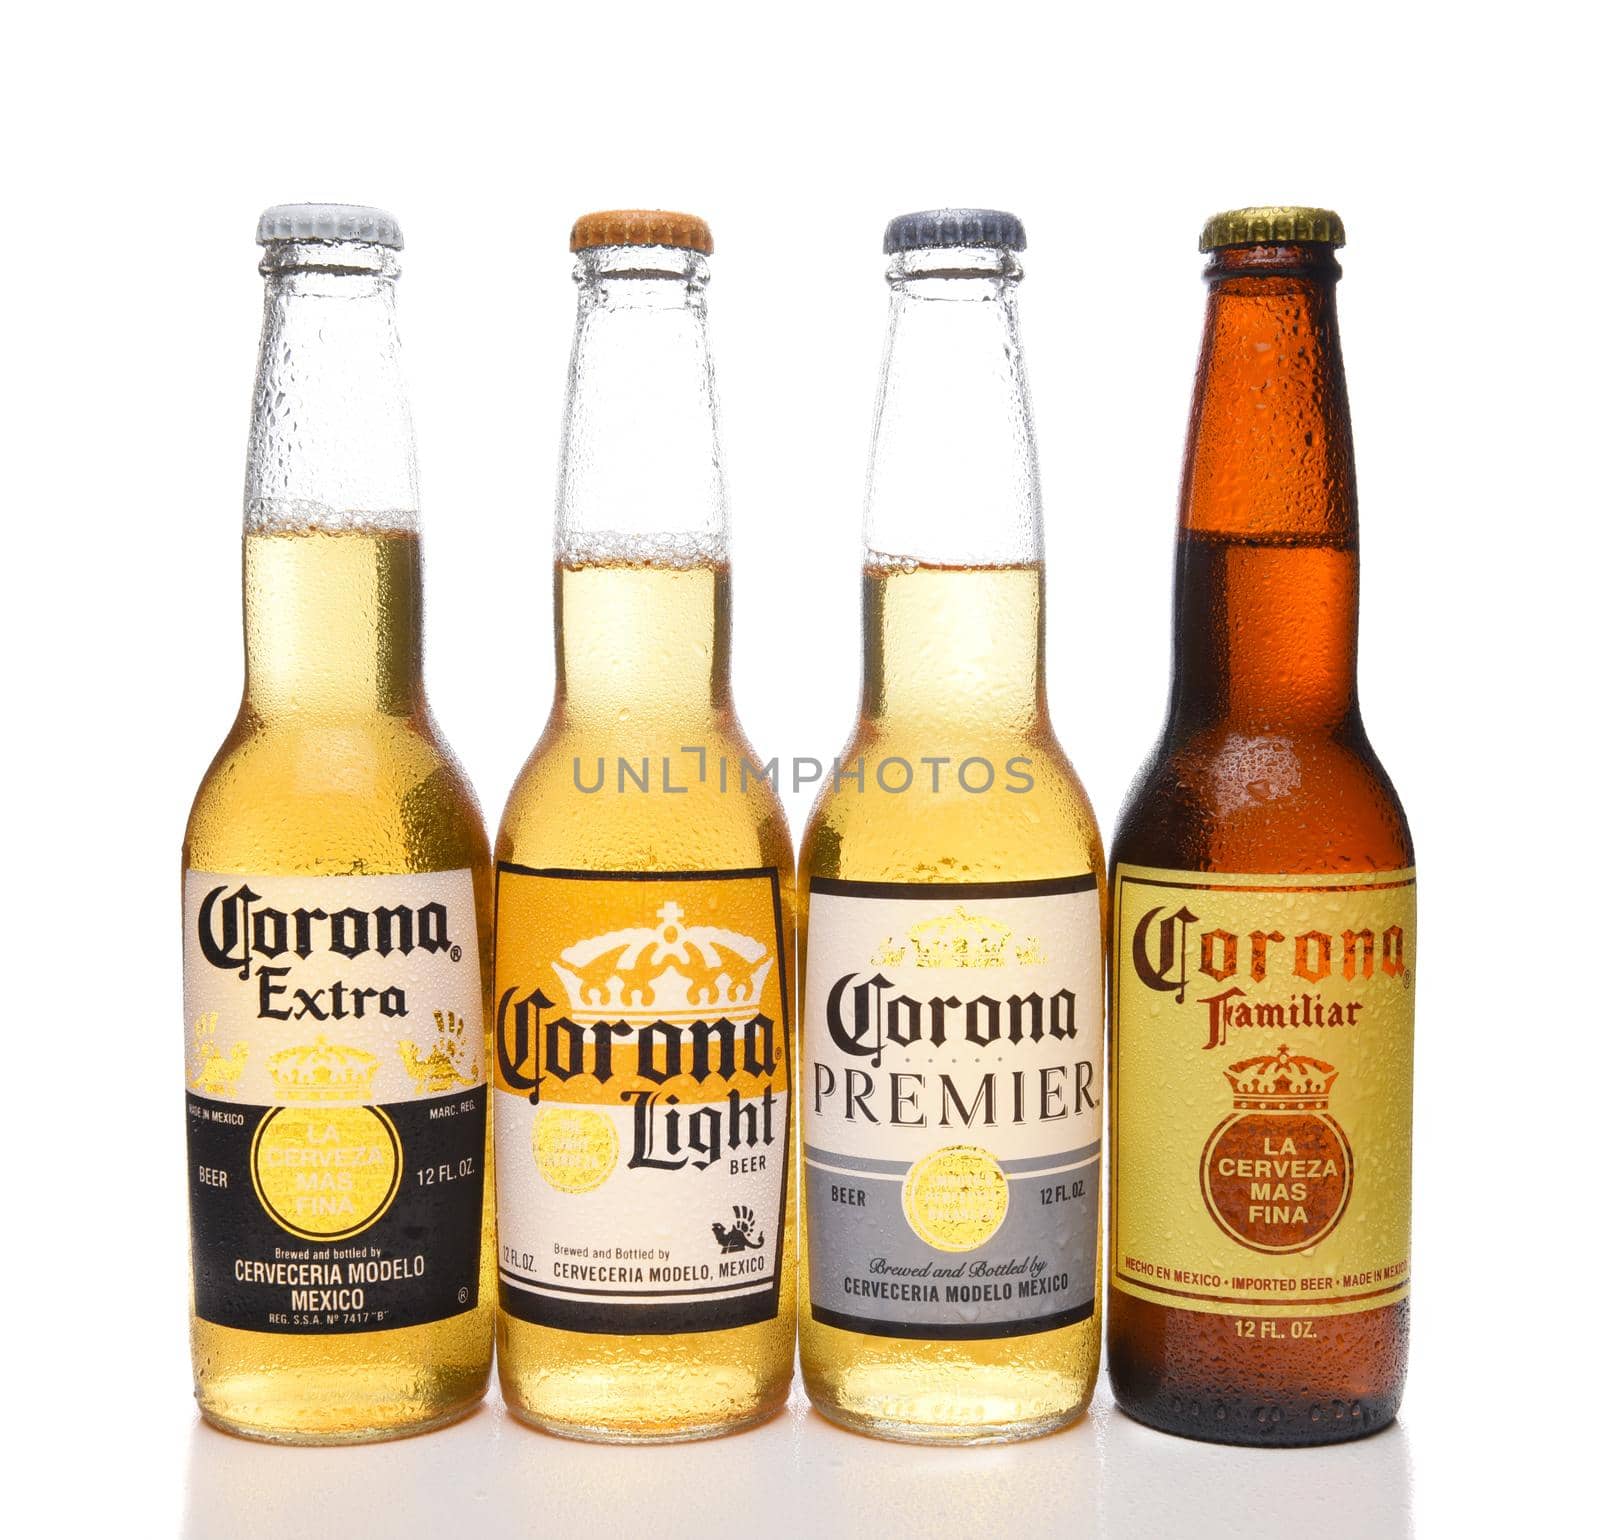 IRVINE, CALIFORNIA - APRIL 5, 2018: Four different bottles of Corona Beers, including, Extra, Light, Premier and Familiar.